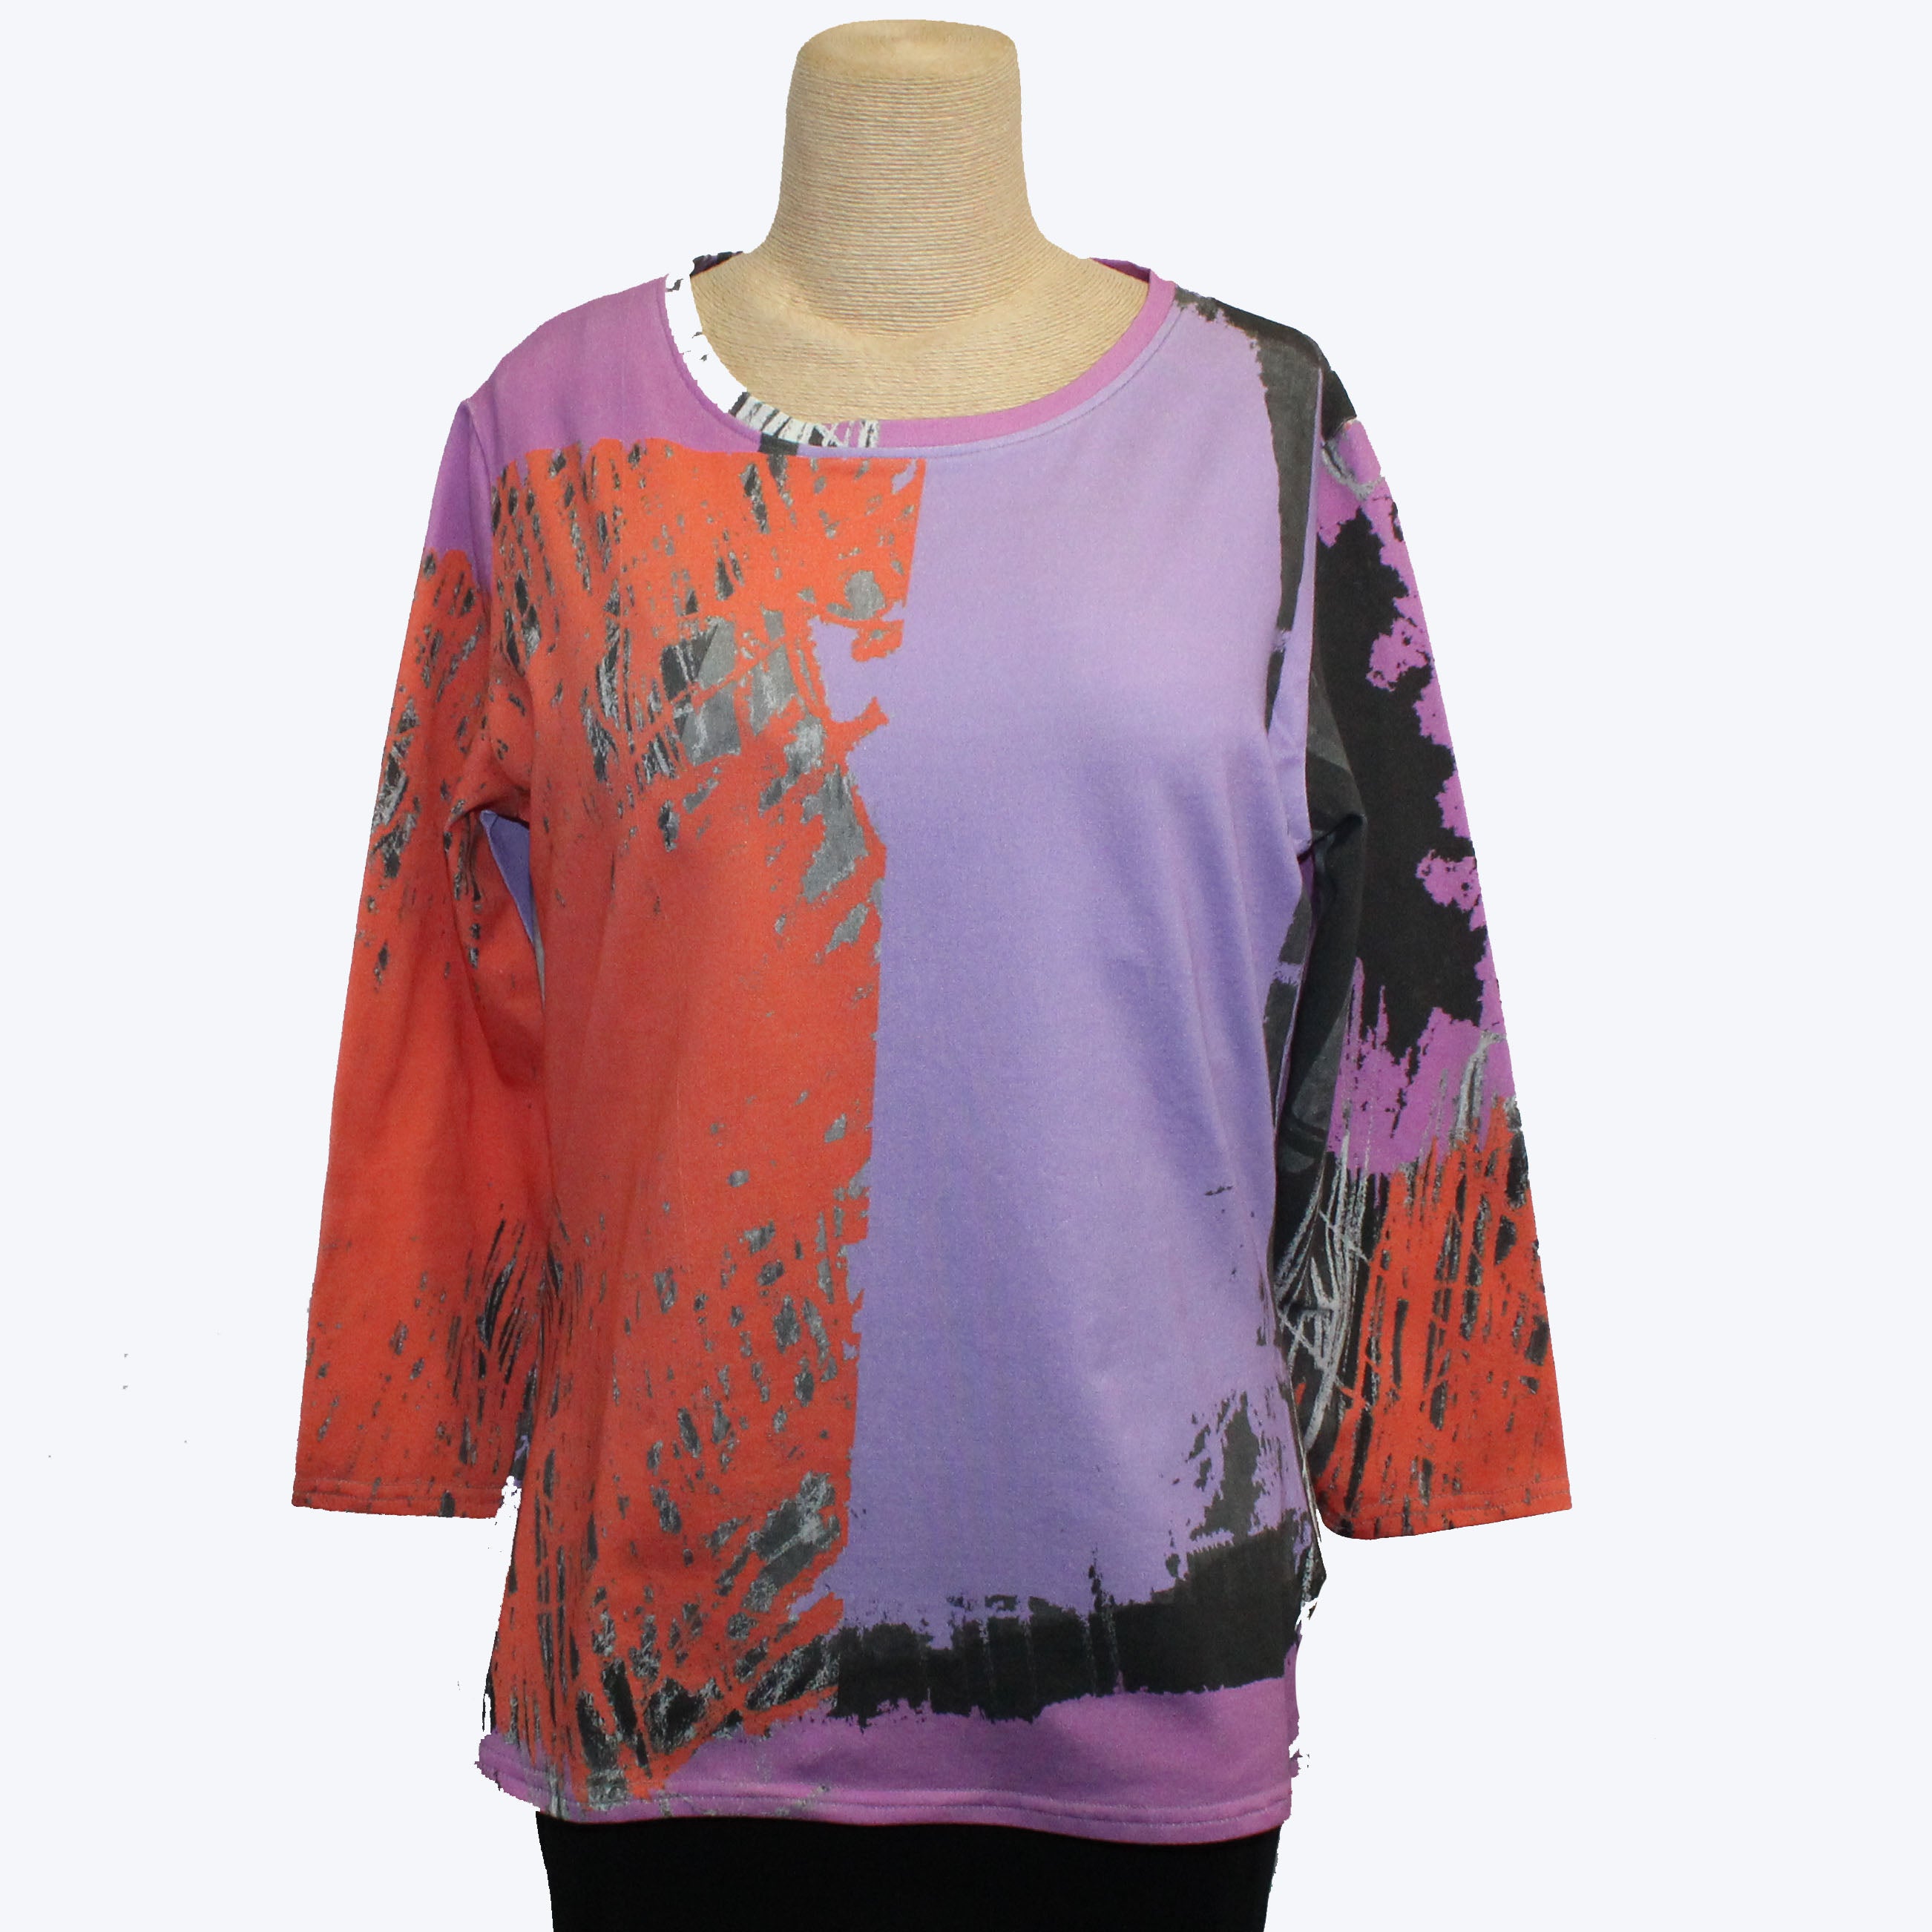 Andrea Geer Pullover, Fitted, 3/4 Sleeve, Purple/Orange/Rose, XS